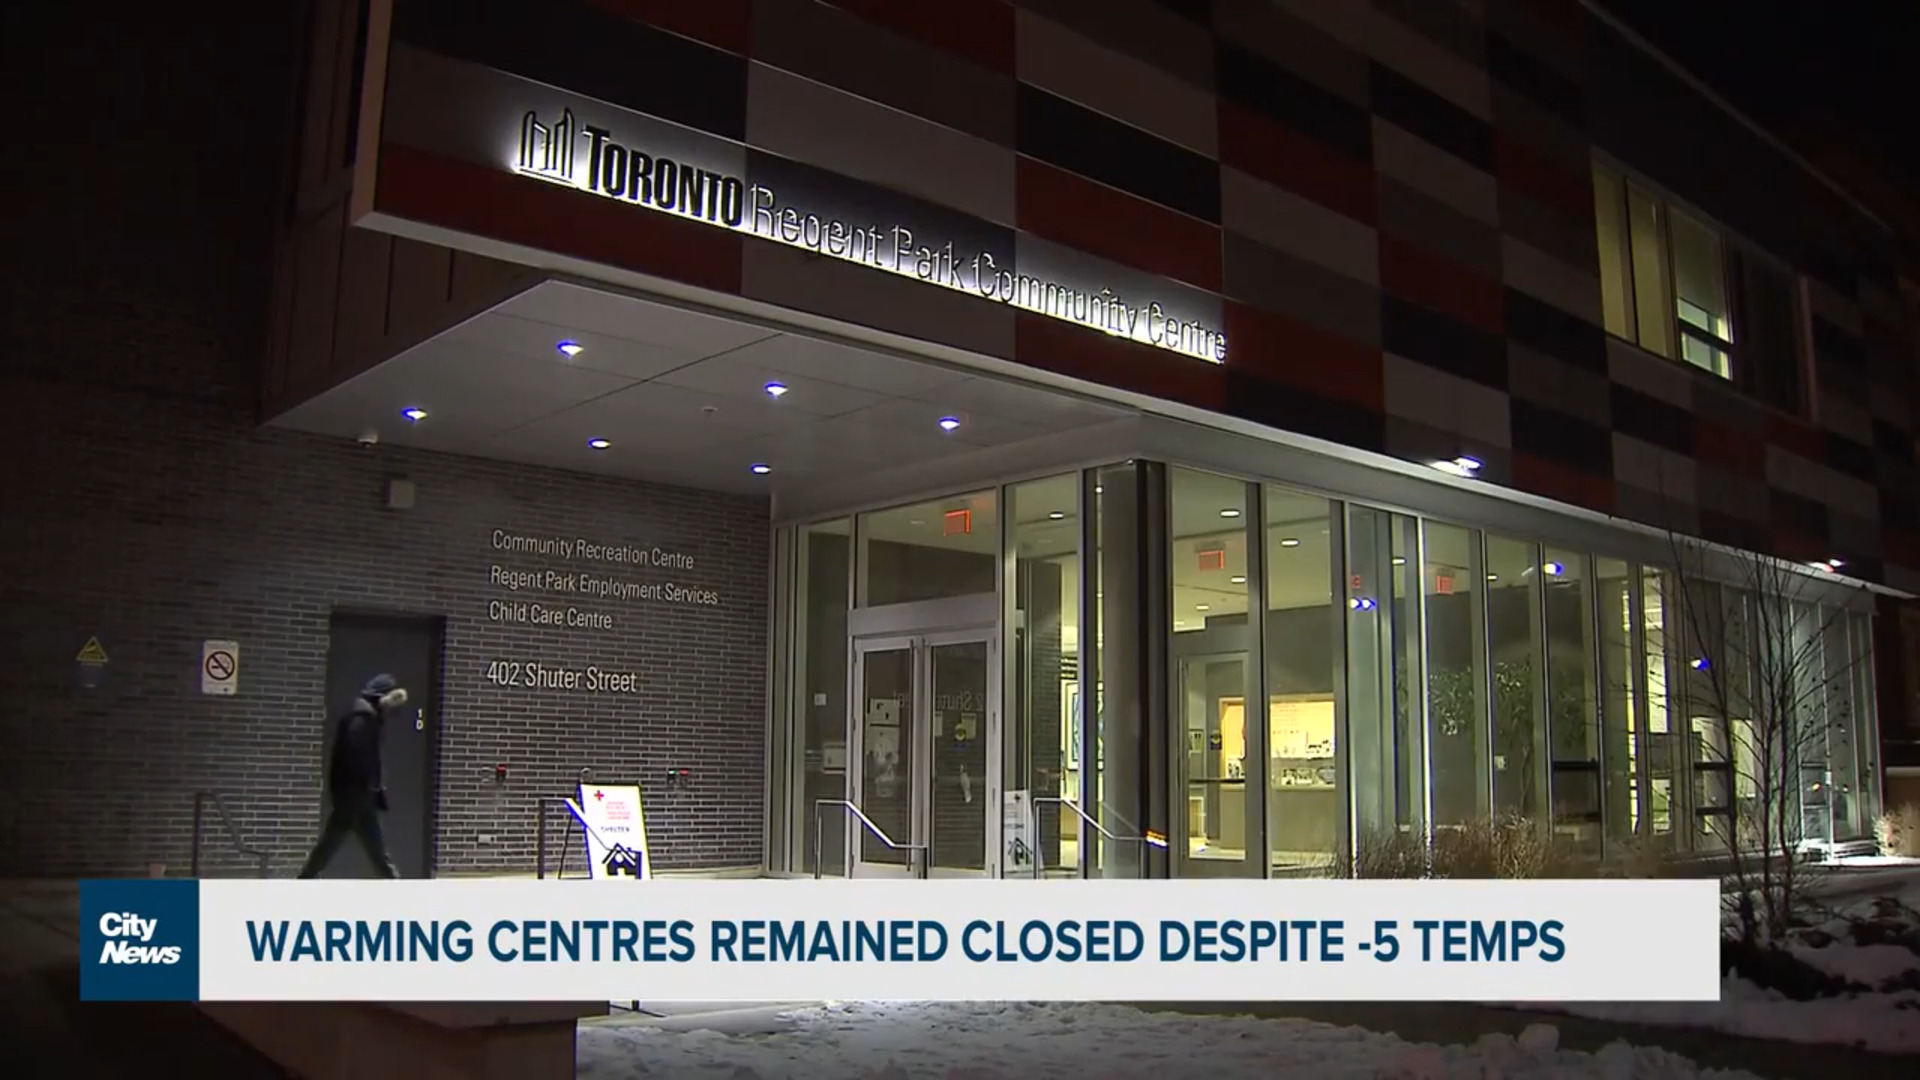 Warming centres remained closed despite temperatures dipping to -5 degrees Celsius